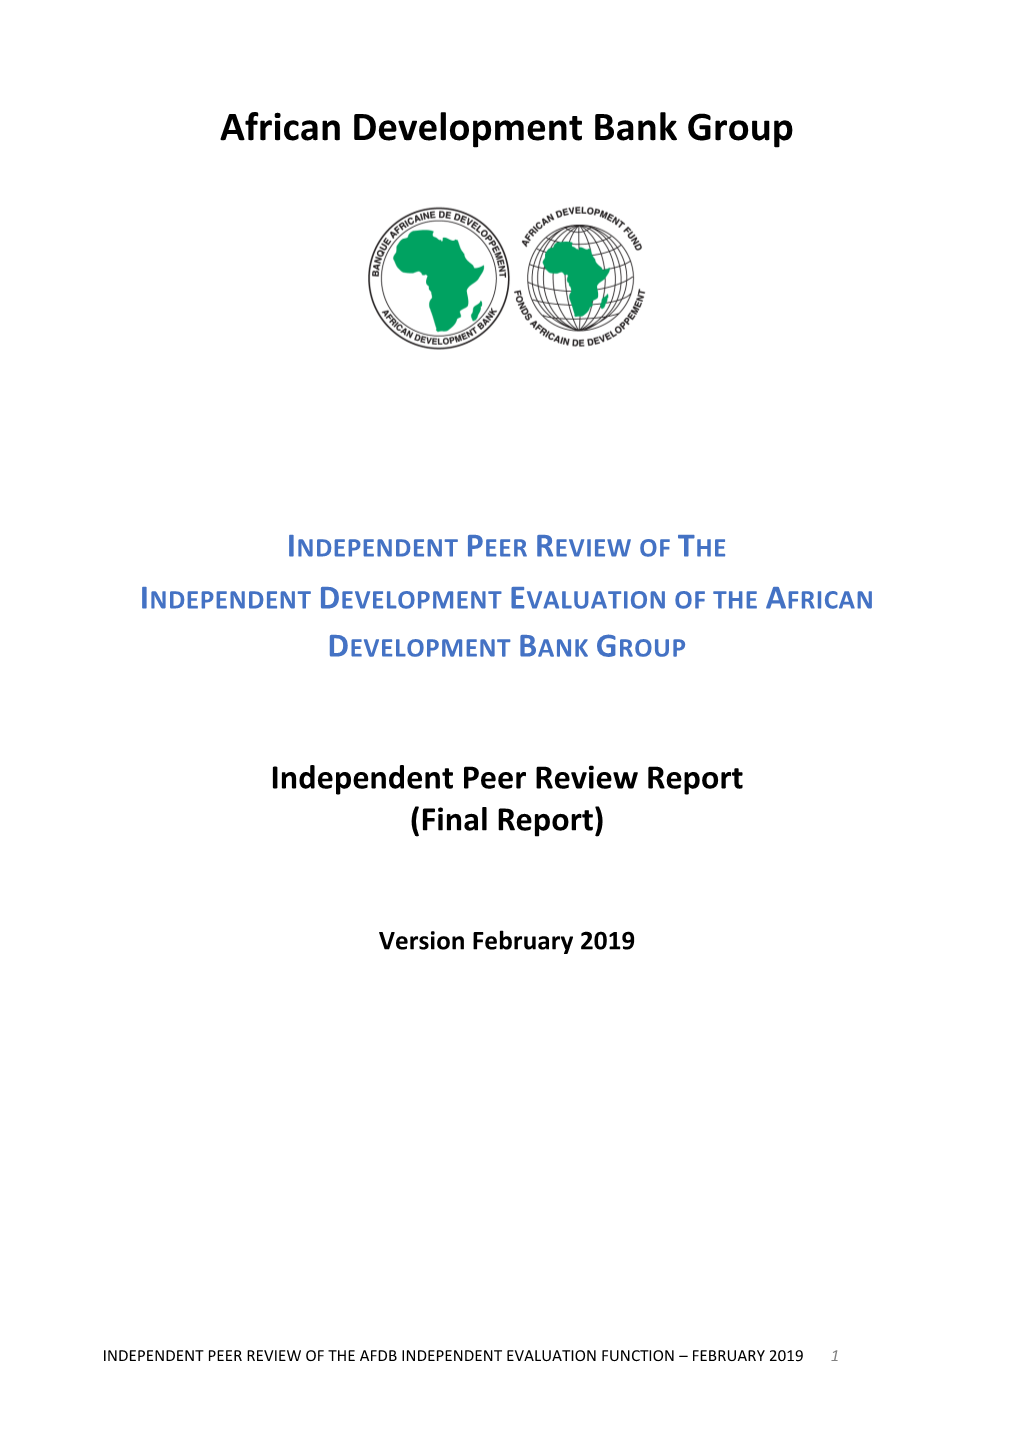 Independent Peer Review Report (Final Report)